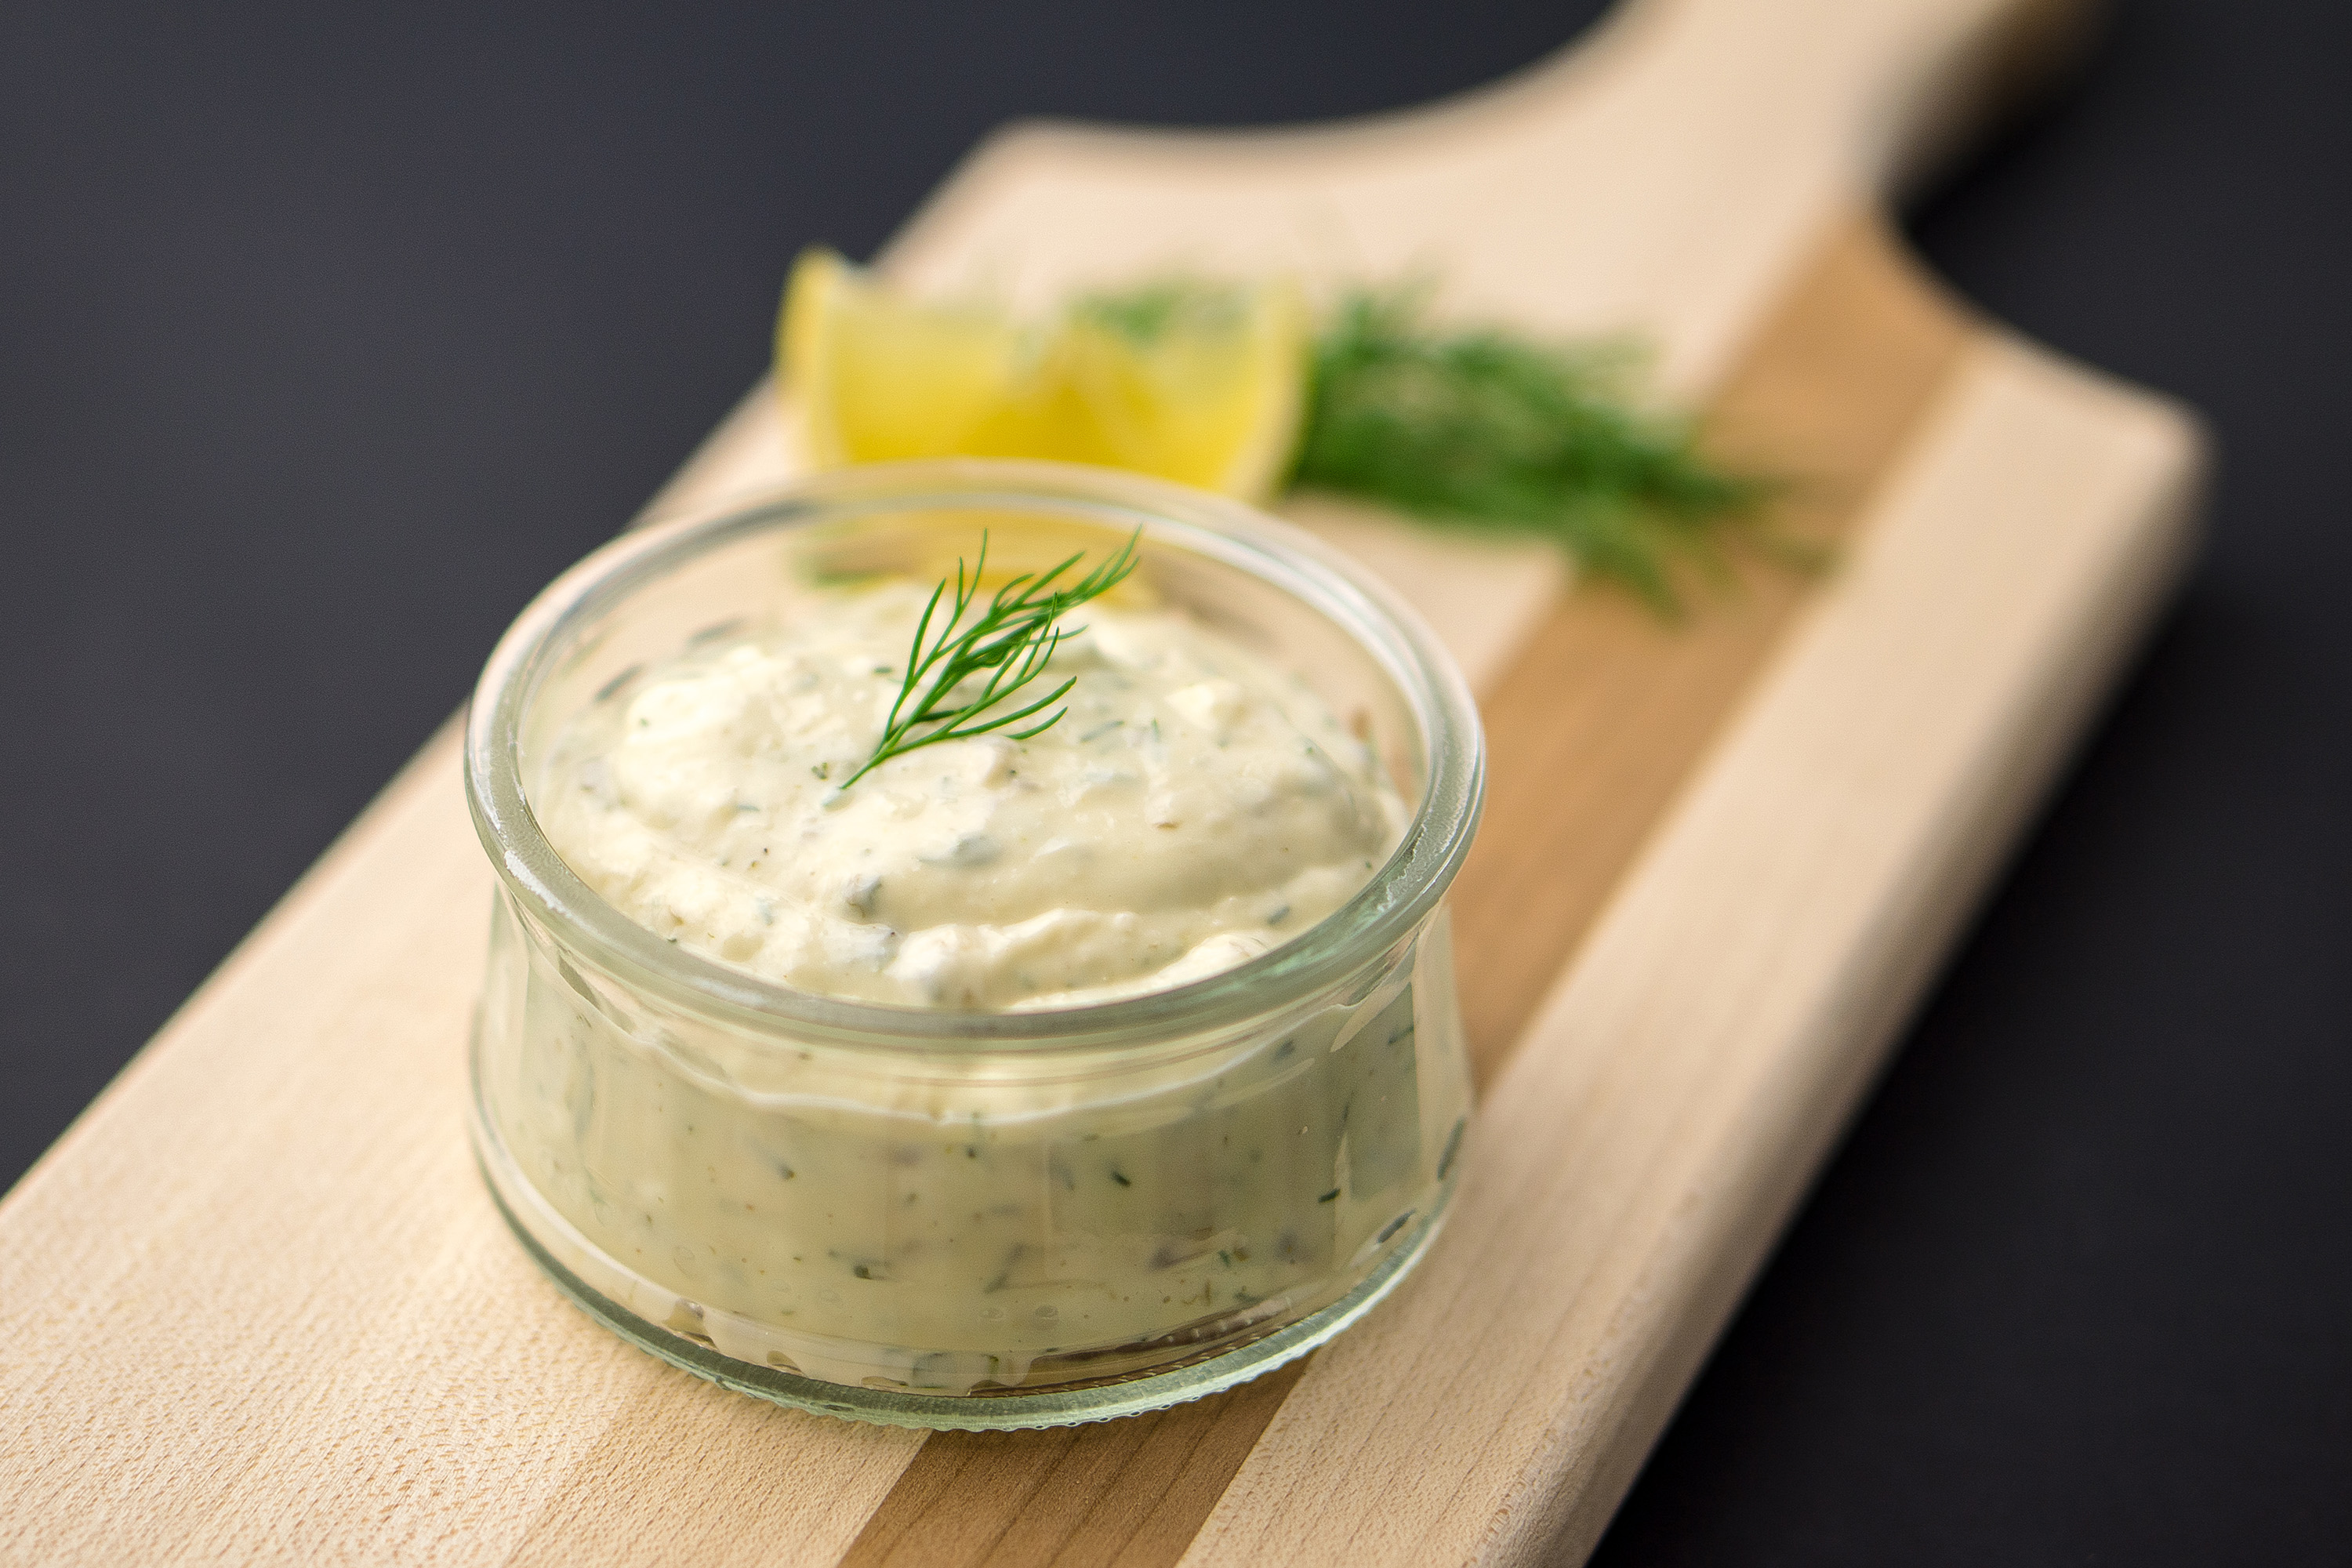 Sauce Tartare | Traditional Sauce From France